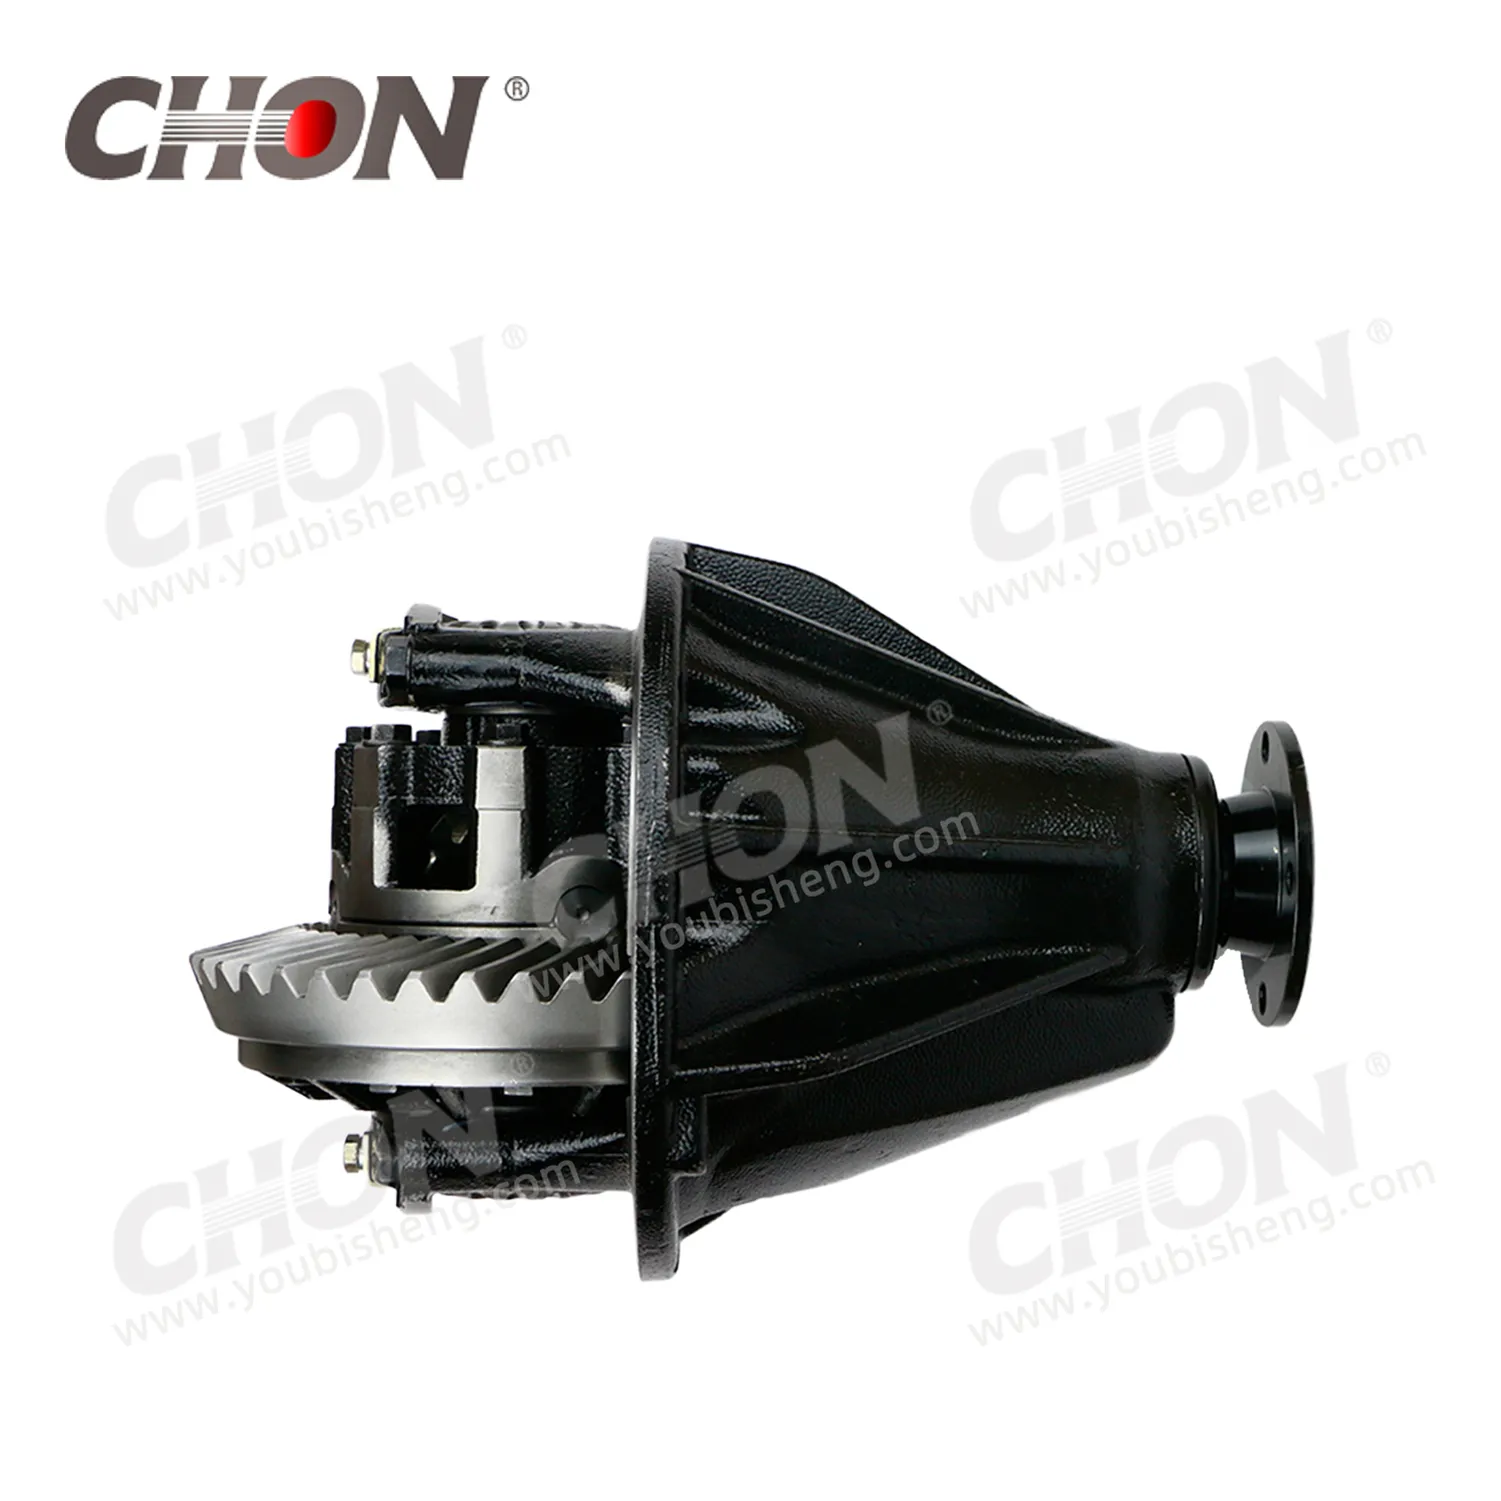 CHON 41110-60880 41110-60881 41110-60A30 41110-60A31 Toy ota Hzj79l-Tjmrs Rear Differential And Housings Complete Carrier Assy